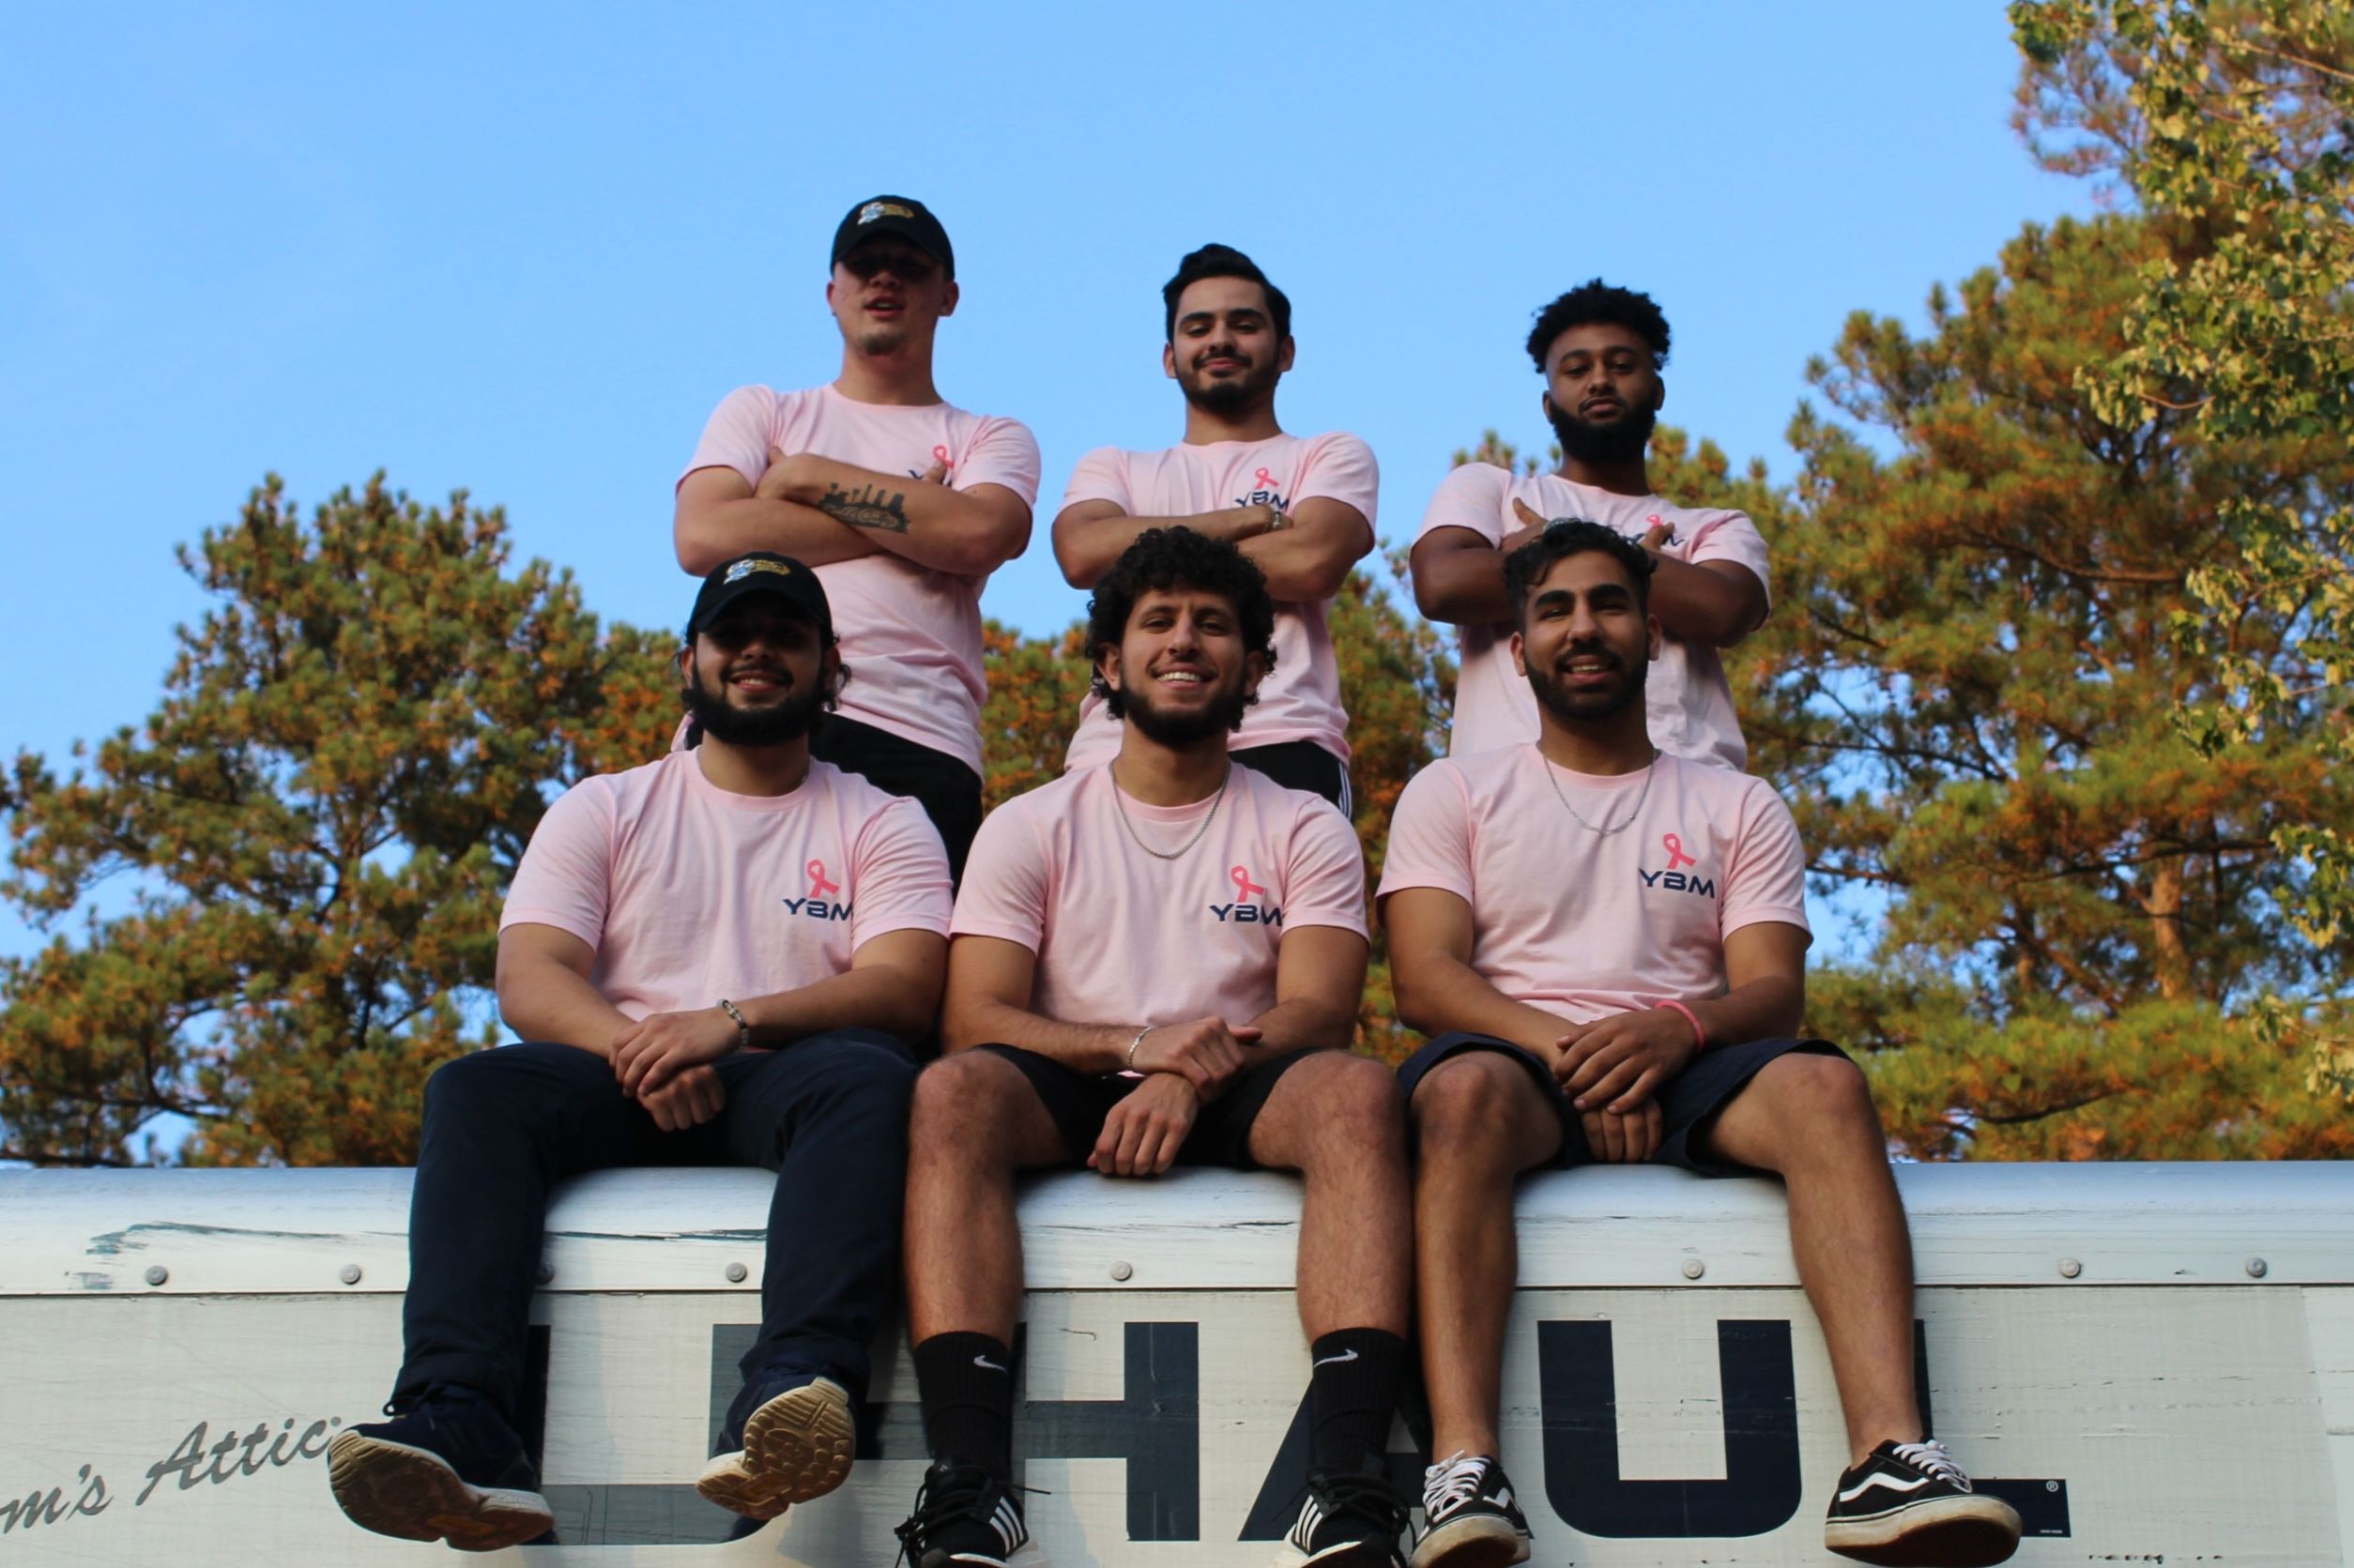 YBM crew members and leaders pose with the breact cancer awareness merch on top of a truck